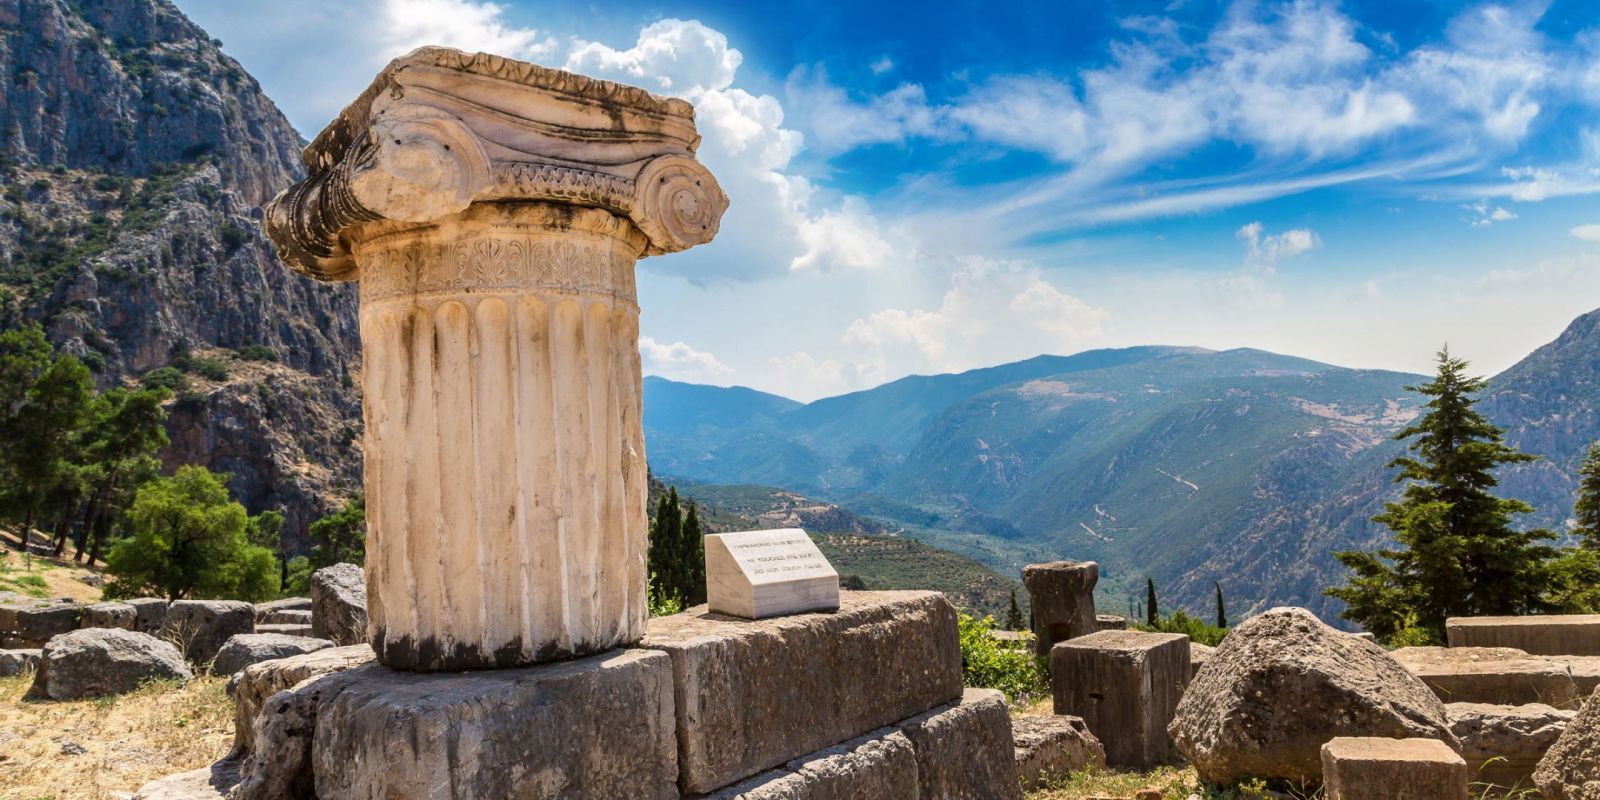 Delphi, Greece - Explore Greece central region main attractions with 14 days tour from Athens. Private car tour by Monterrasol Travel.